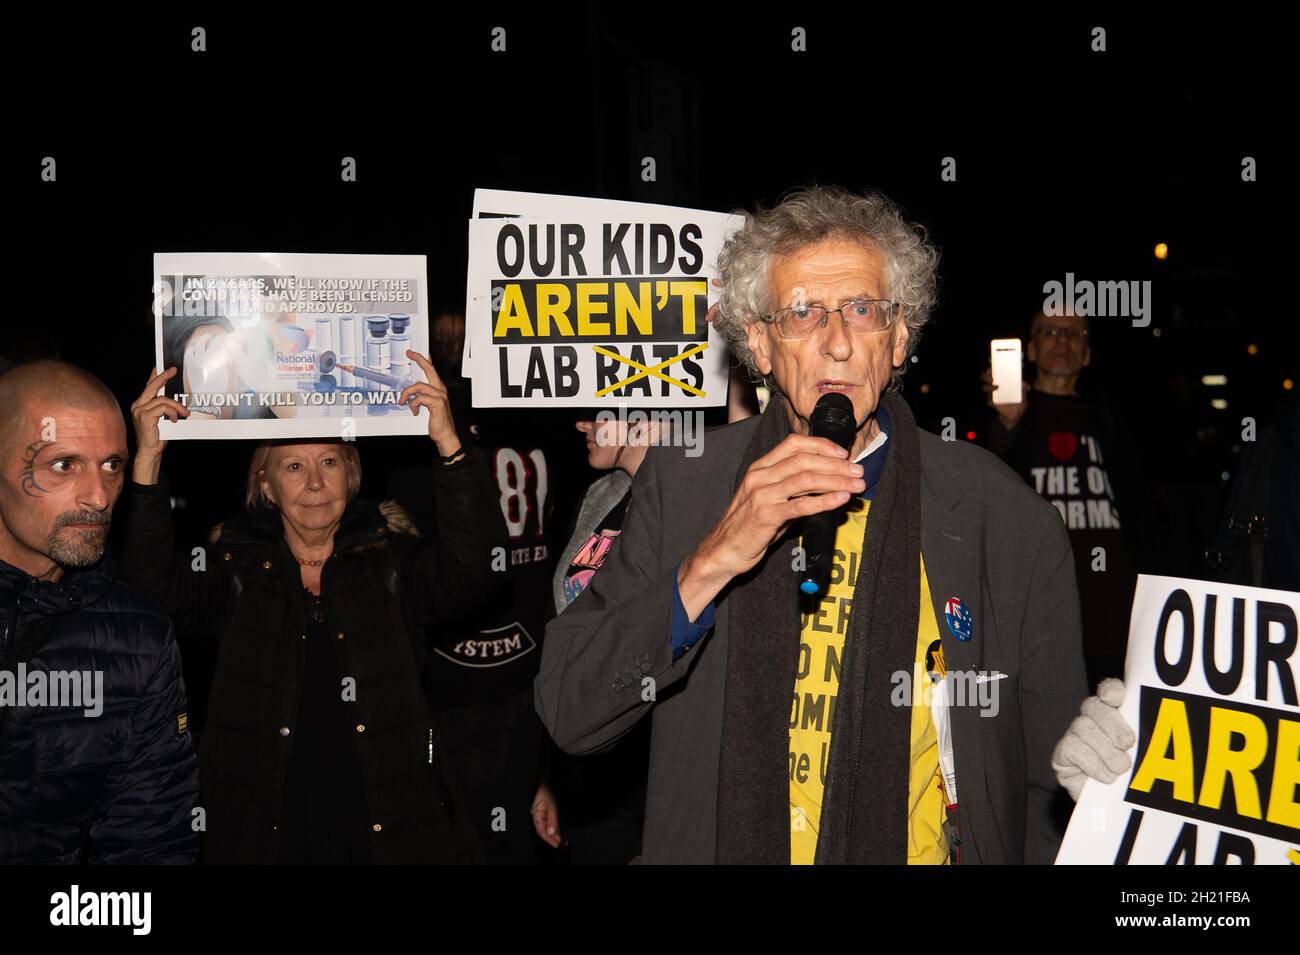 Westminster, UK. Controversial activist and Anti-Vaxxer Piers Corbyn who is the brother of Labour Party MP, Jeremy Corbyn, was outside the House of Commons this evening with a group of his anti-vax followers some of whom were holding up Our Kids Aren't Lab Rats posters. Piers Corbyn was inviting people to come and burn effigies of Boris Johnson and others on 5th November in London. His followers were also challenging members of the public who were wearing face masks Stock Photo